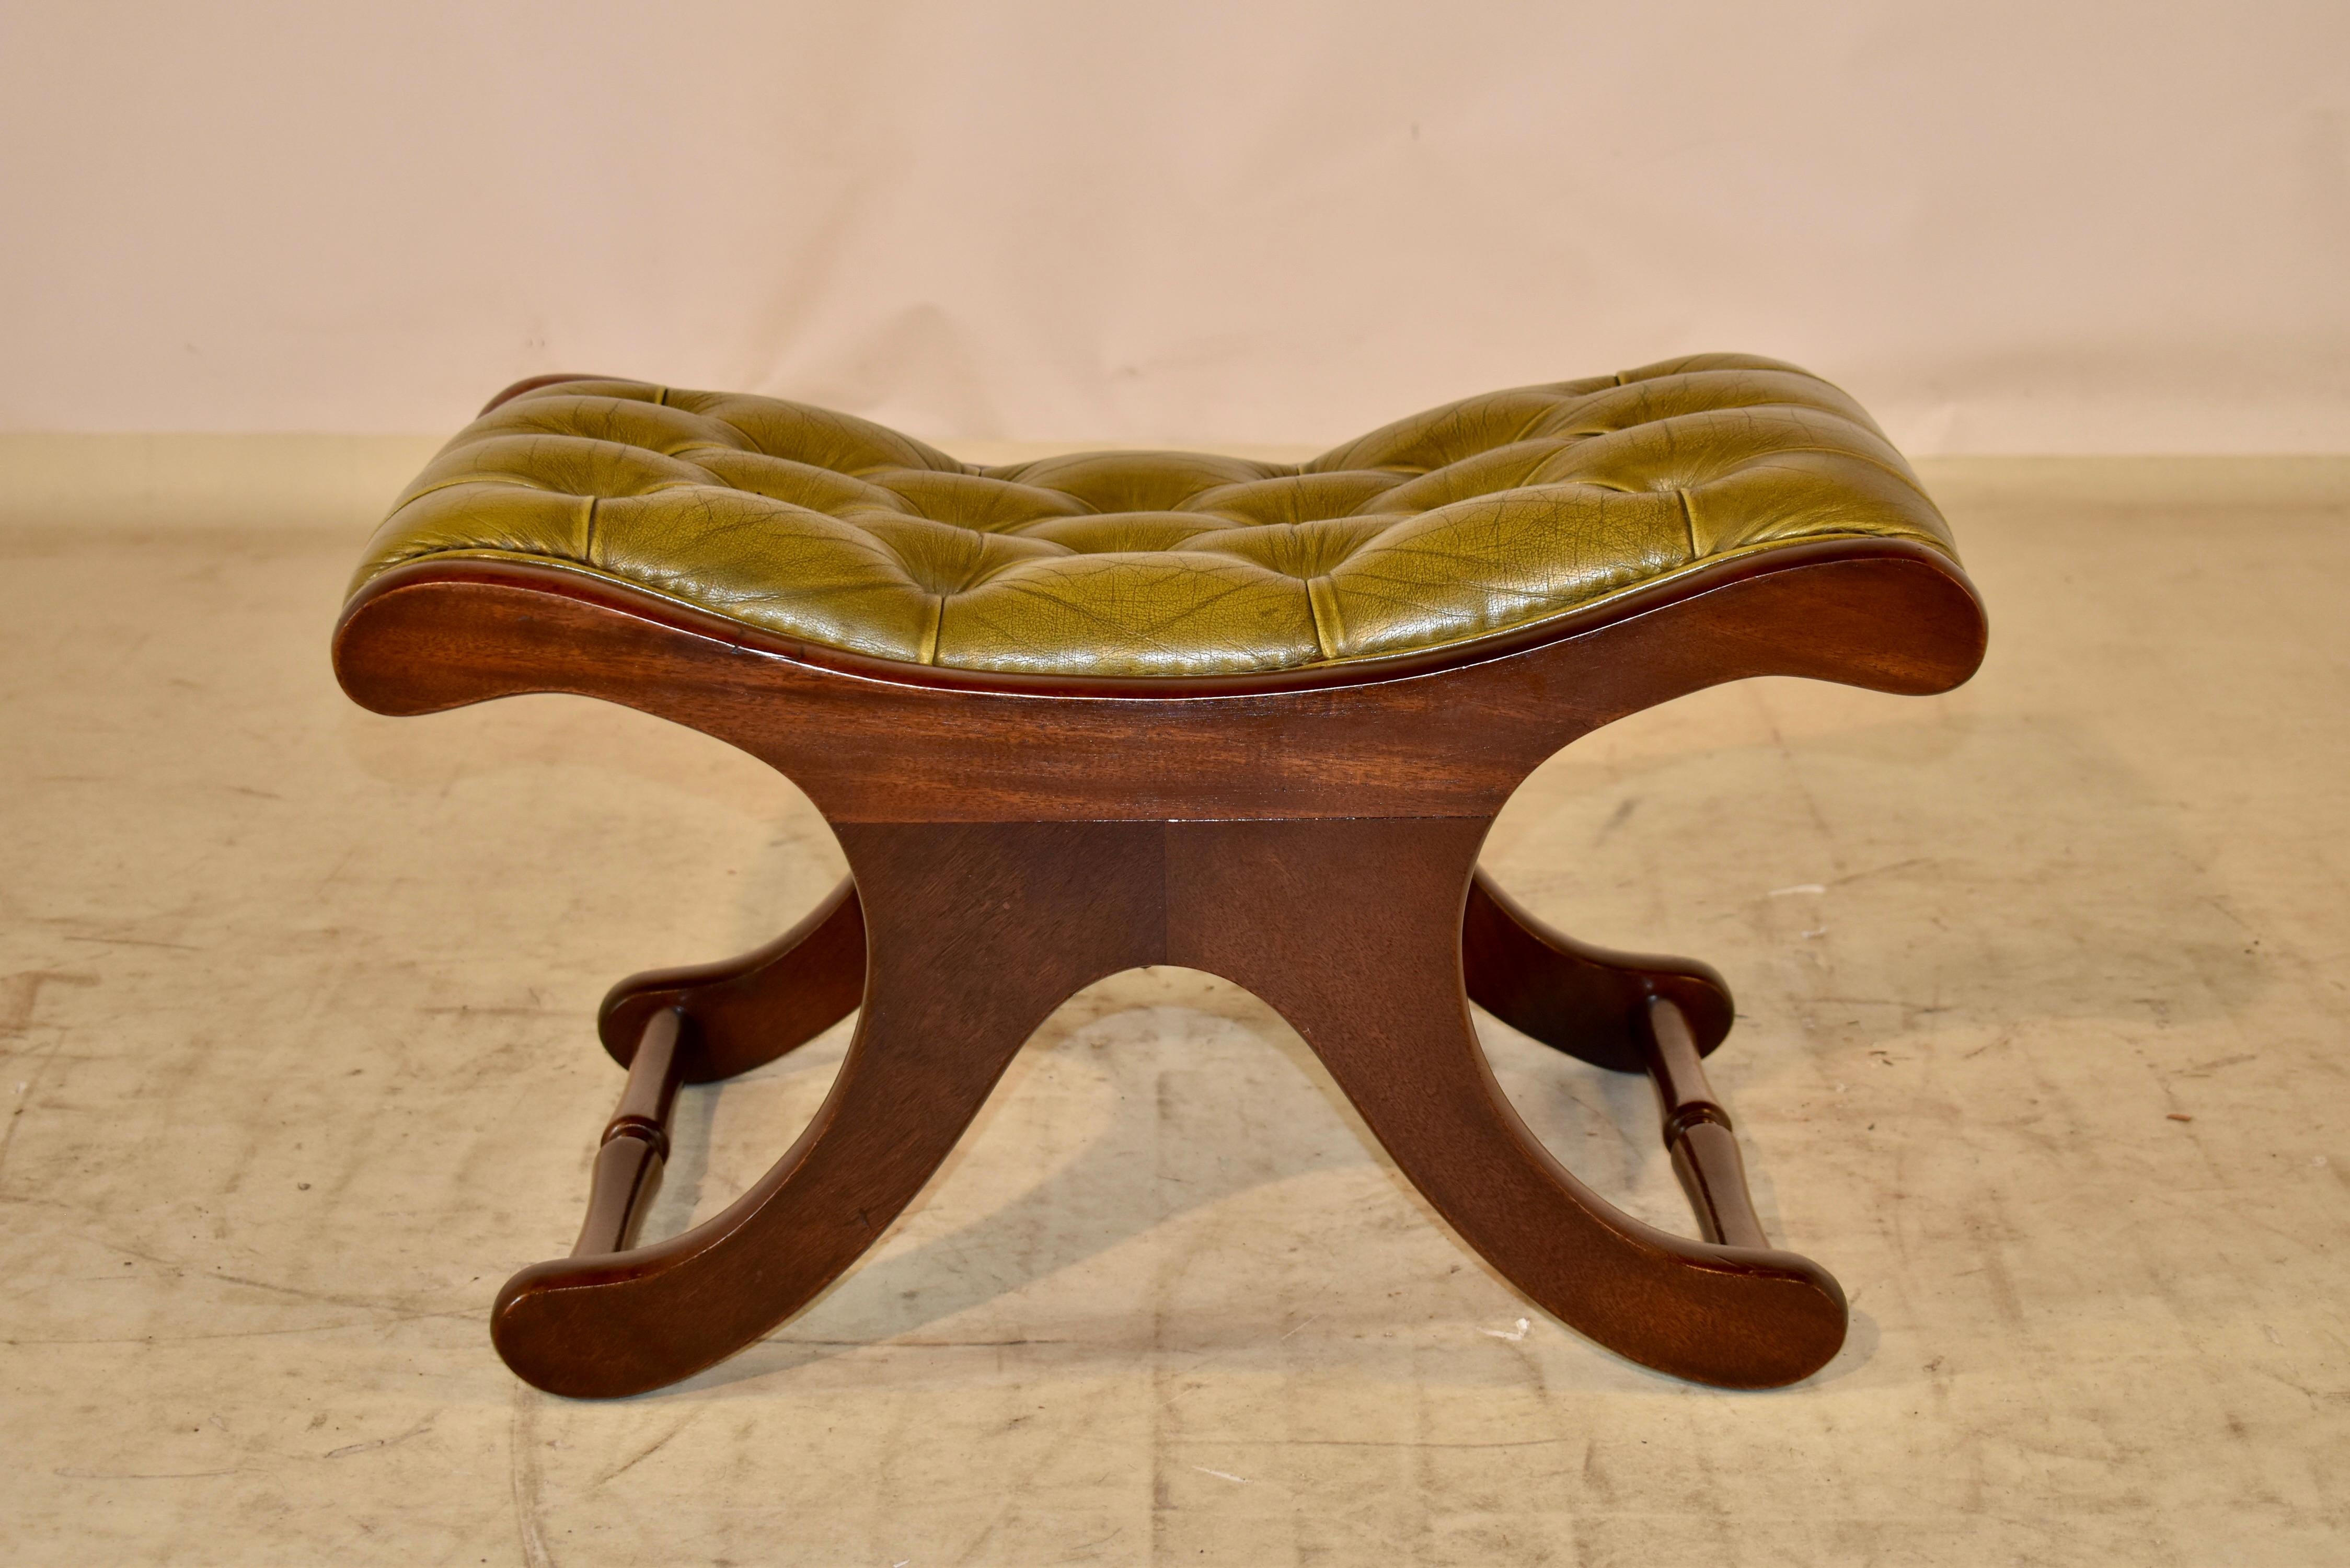 circa 1900-1920 mahogany stool from England with a green leather seat. The leather is original and is upholstered in an attractive Chesterfield pattern. the frame is lovely and shapely, with an x type stretcher base. The legs are joined by hand